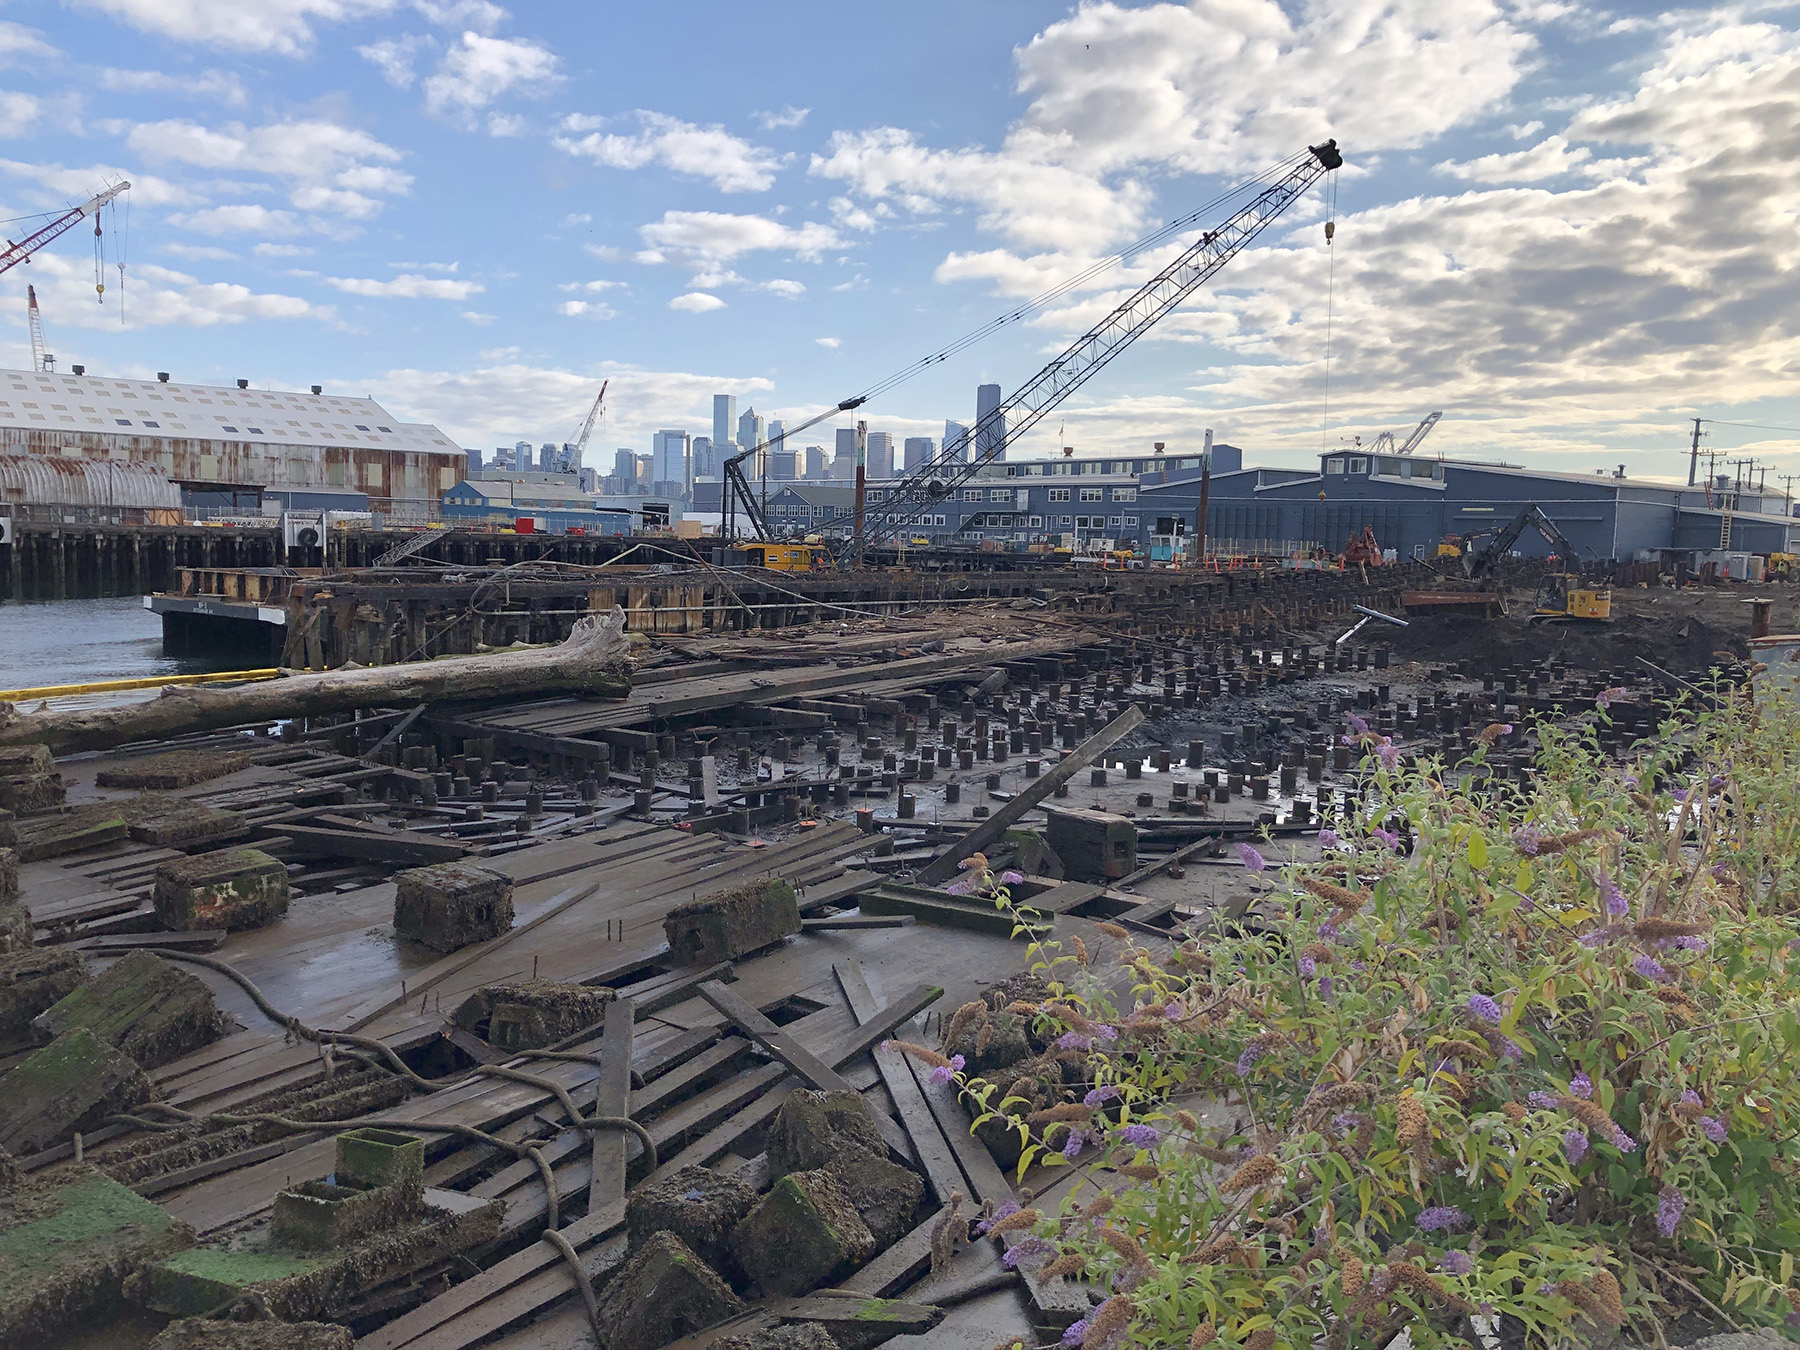 Discarded lumber and other artifacts are shown in this image of a shipyard.